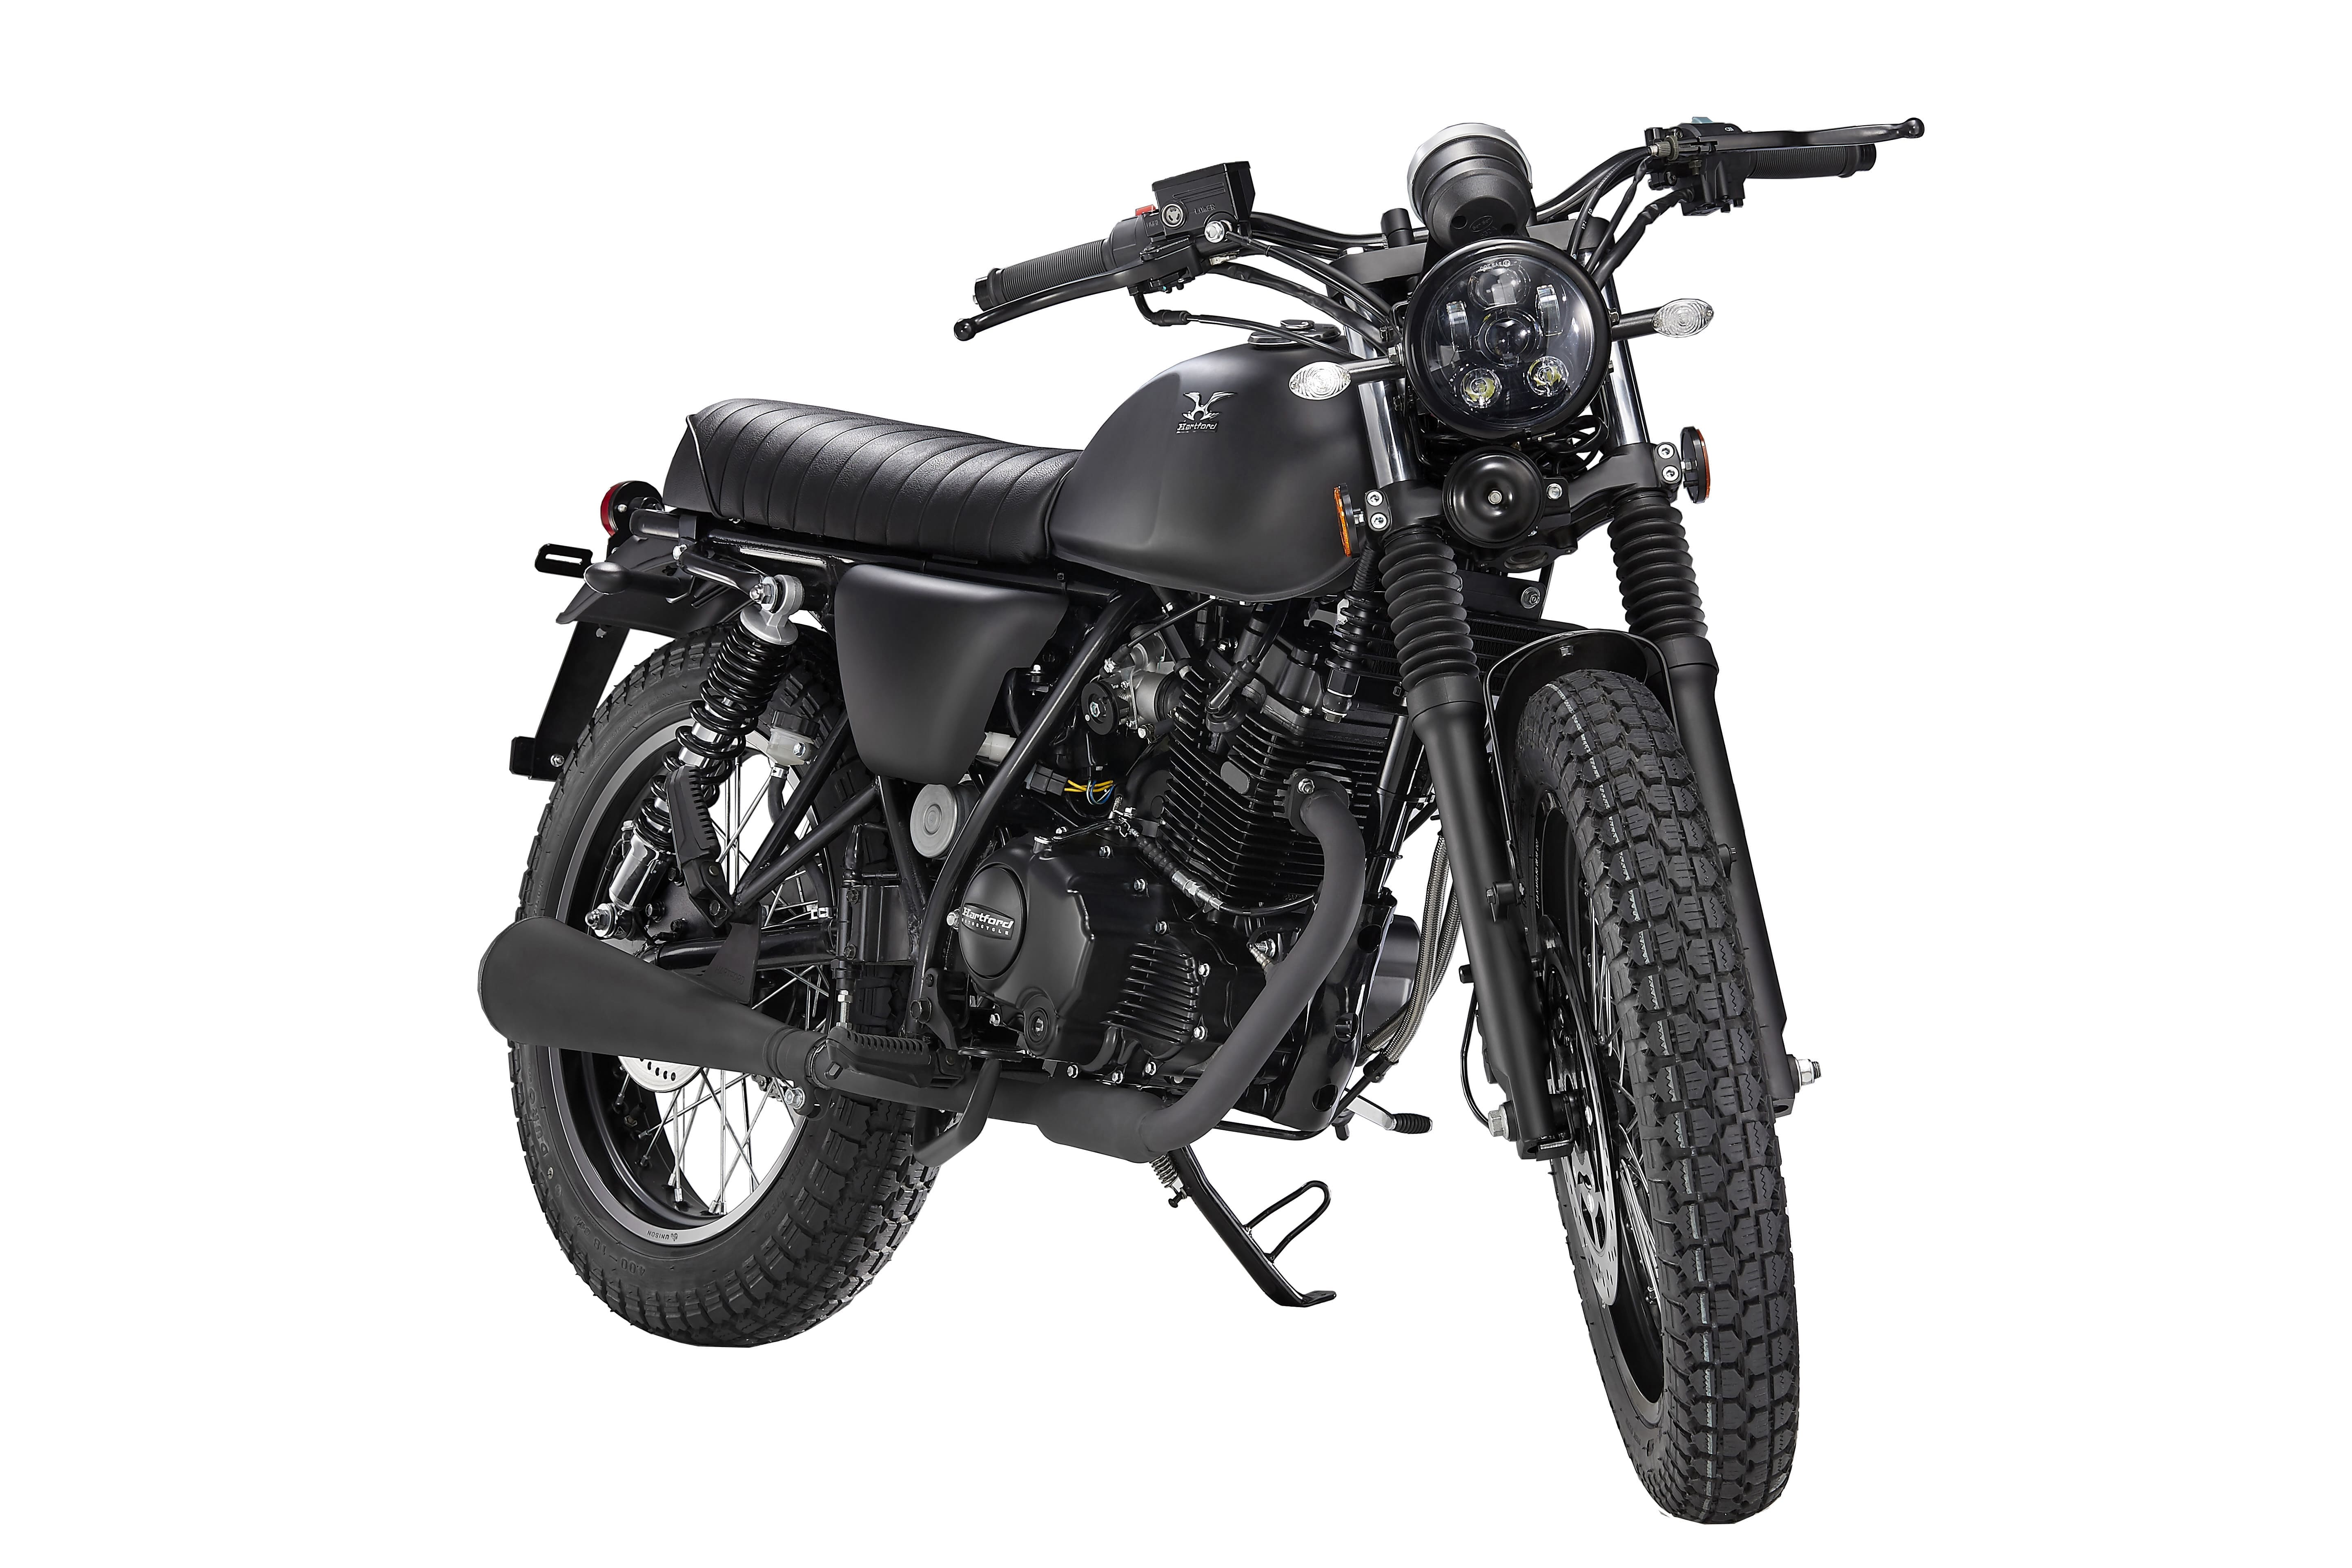 Off Road Motorcycle 250cc - Classic 250 | Taiwantrade.com